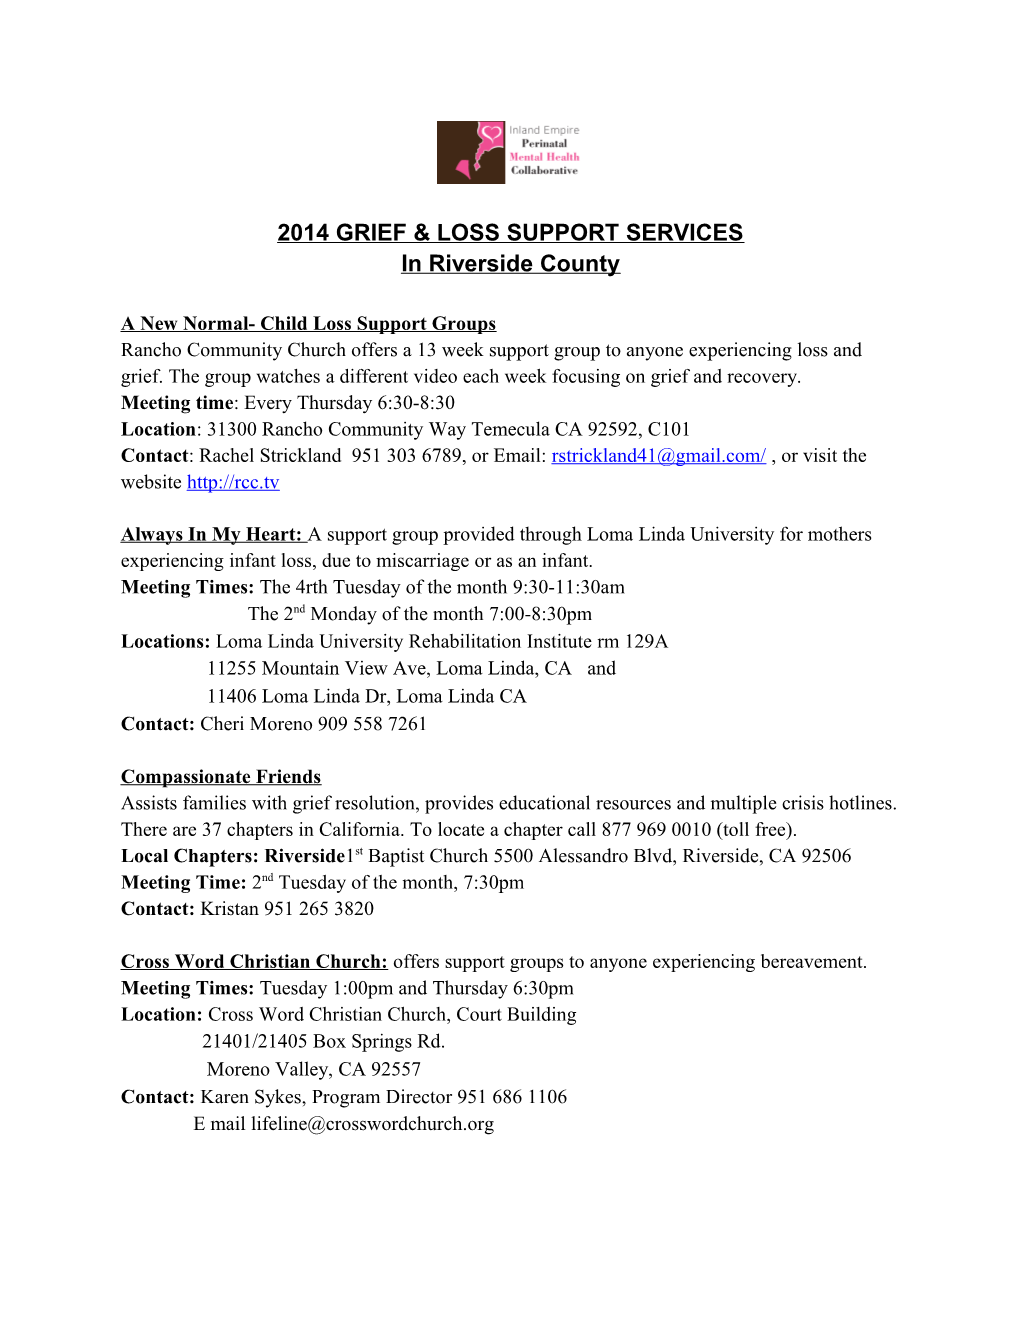 2014 Grief & Loss Support Services